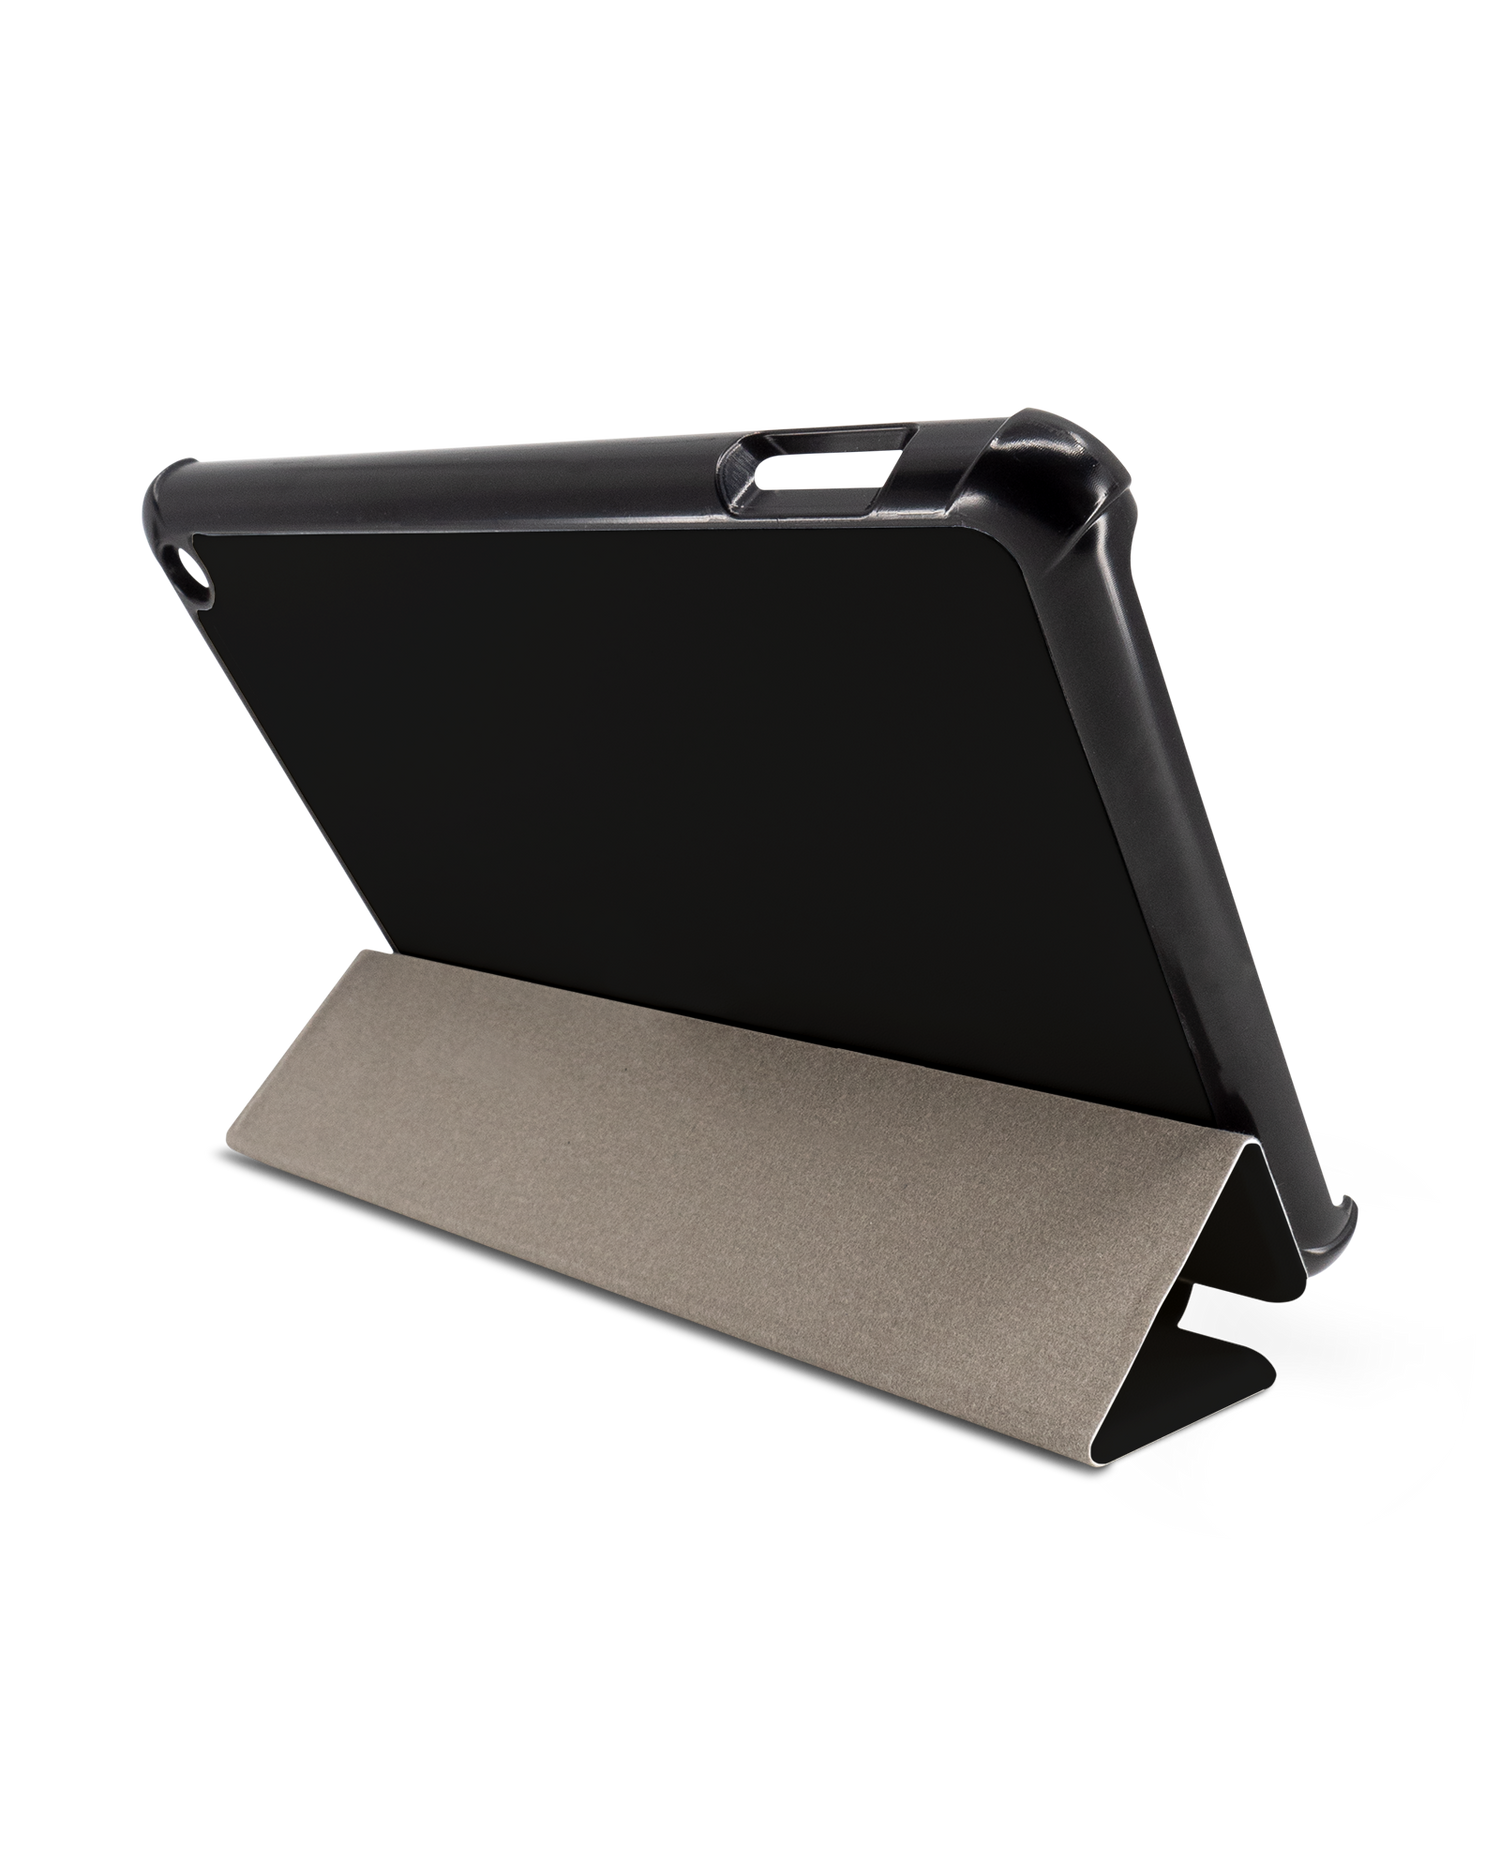 BLACK Tablet Smart Case for Amazon Fire 7 (2022): Used as Stand